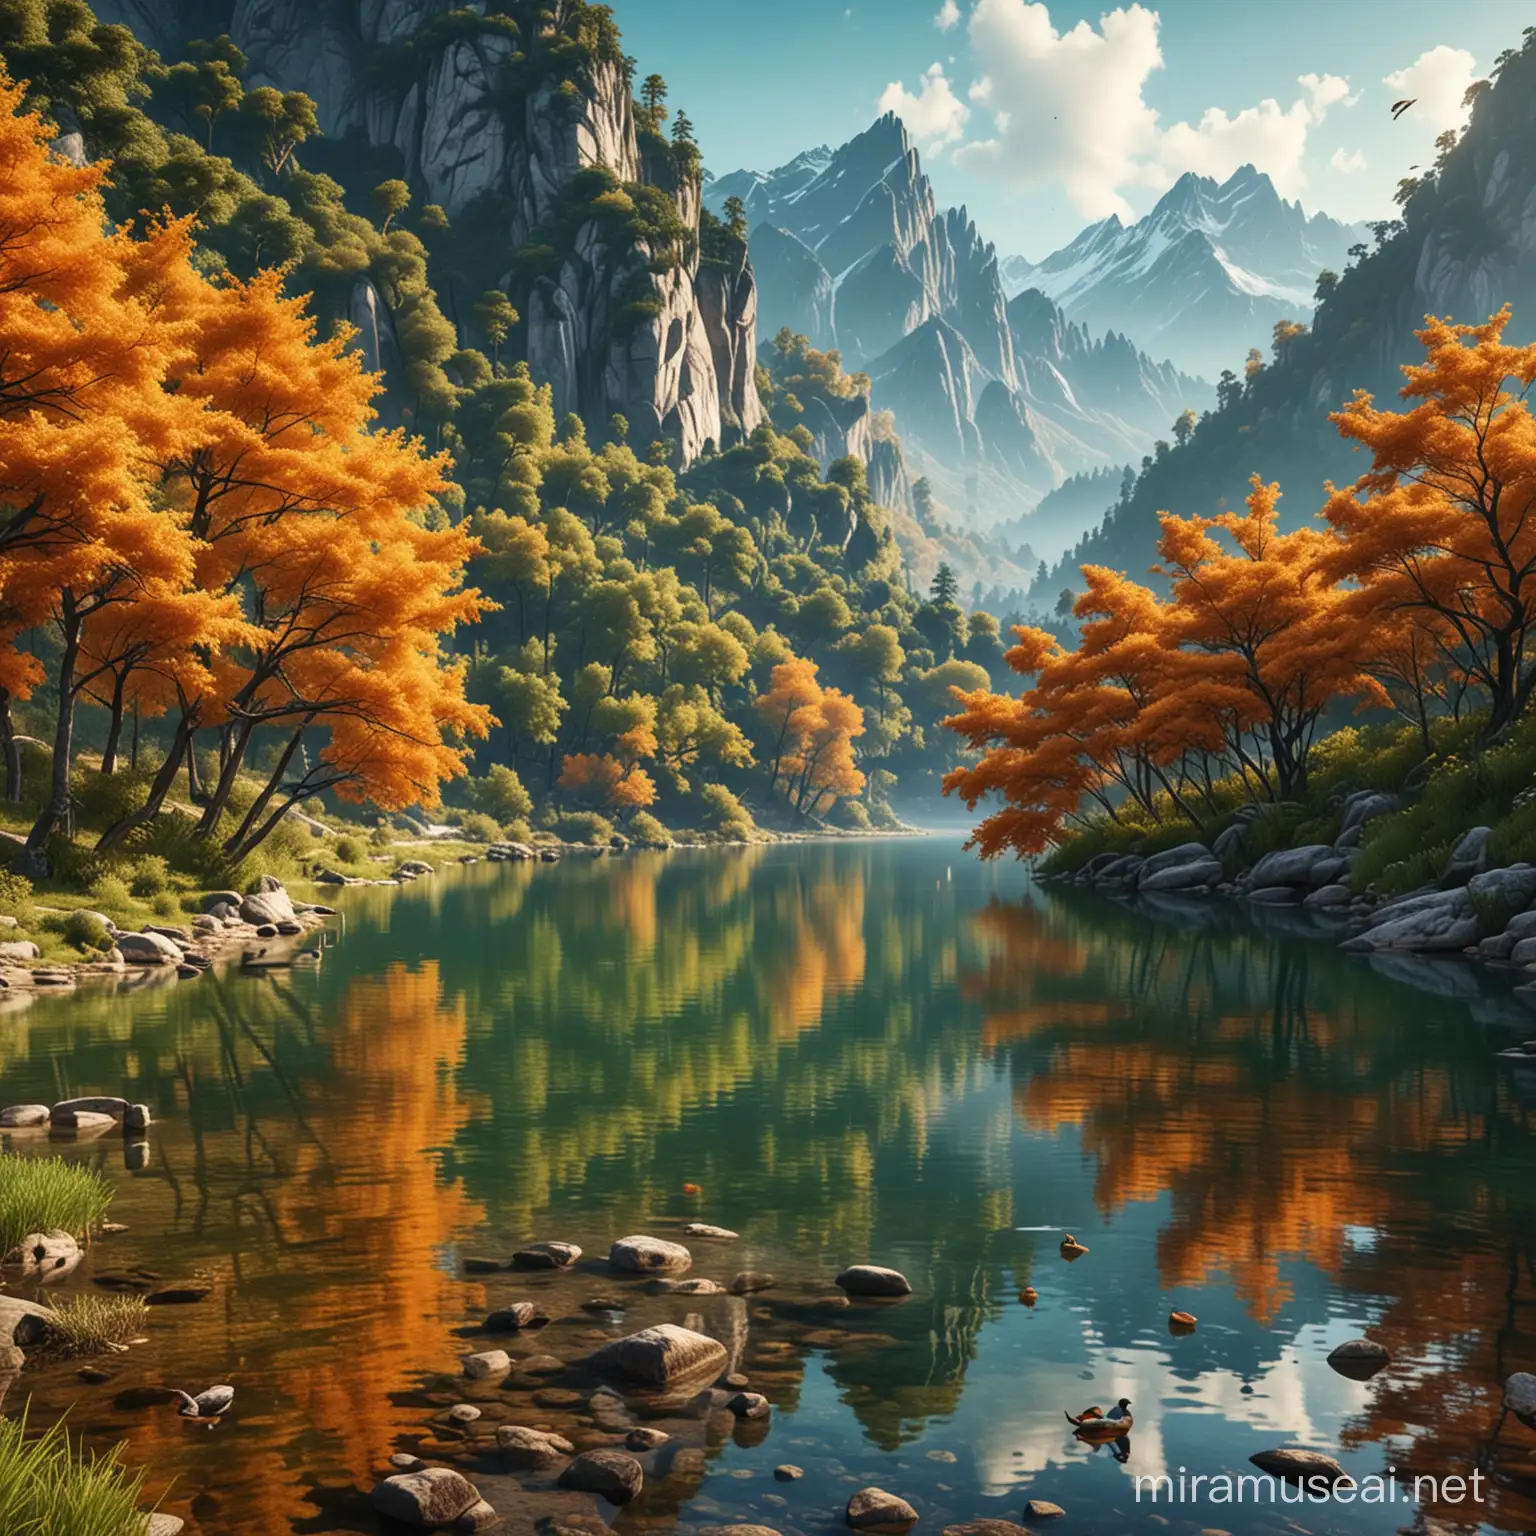 Serene Lake Landscape with Vibrant Forest and Mountain Backdrop